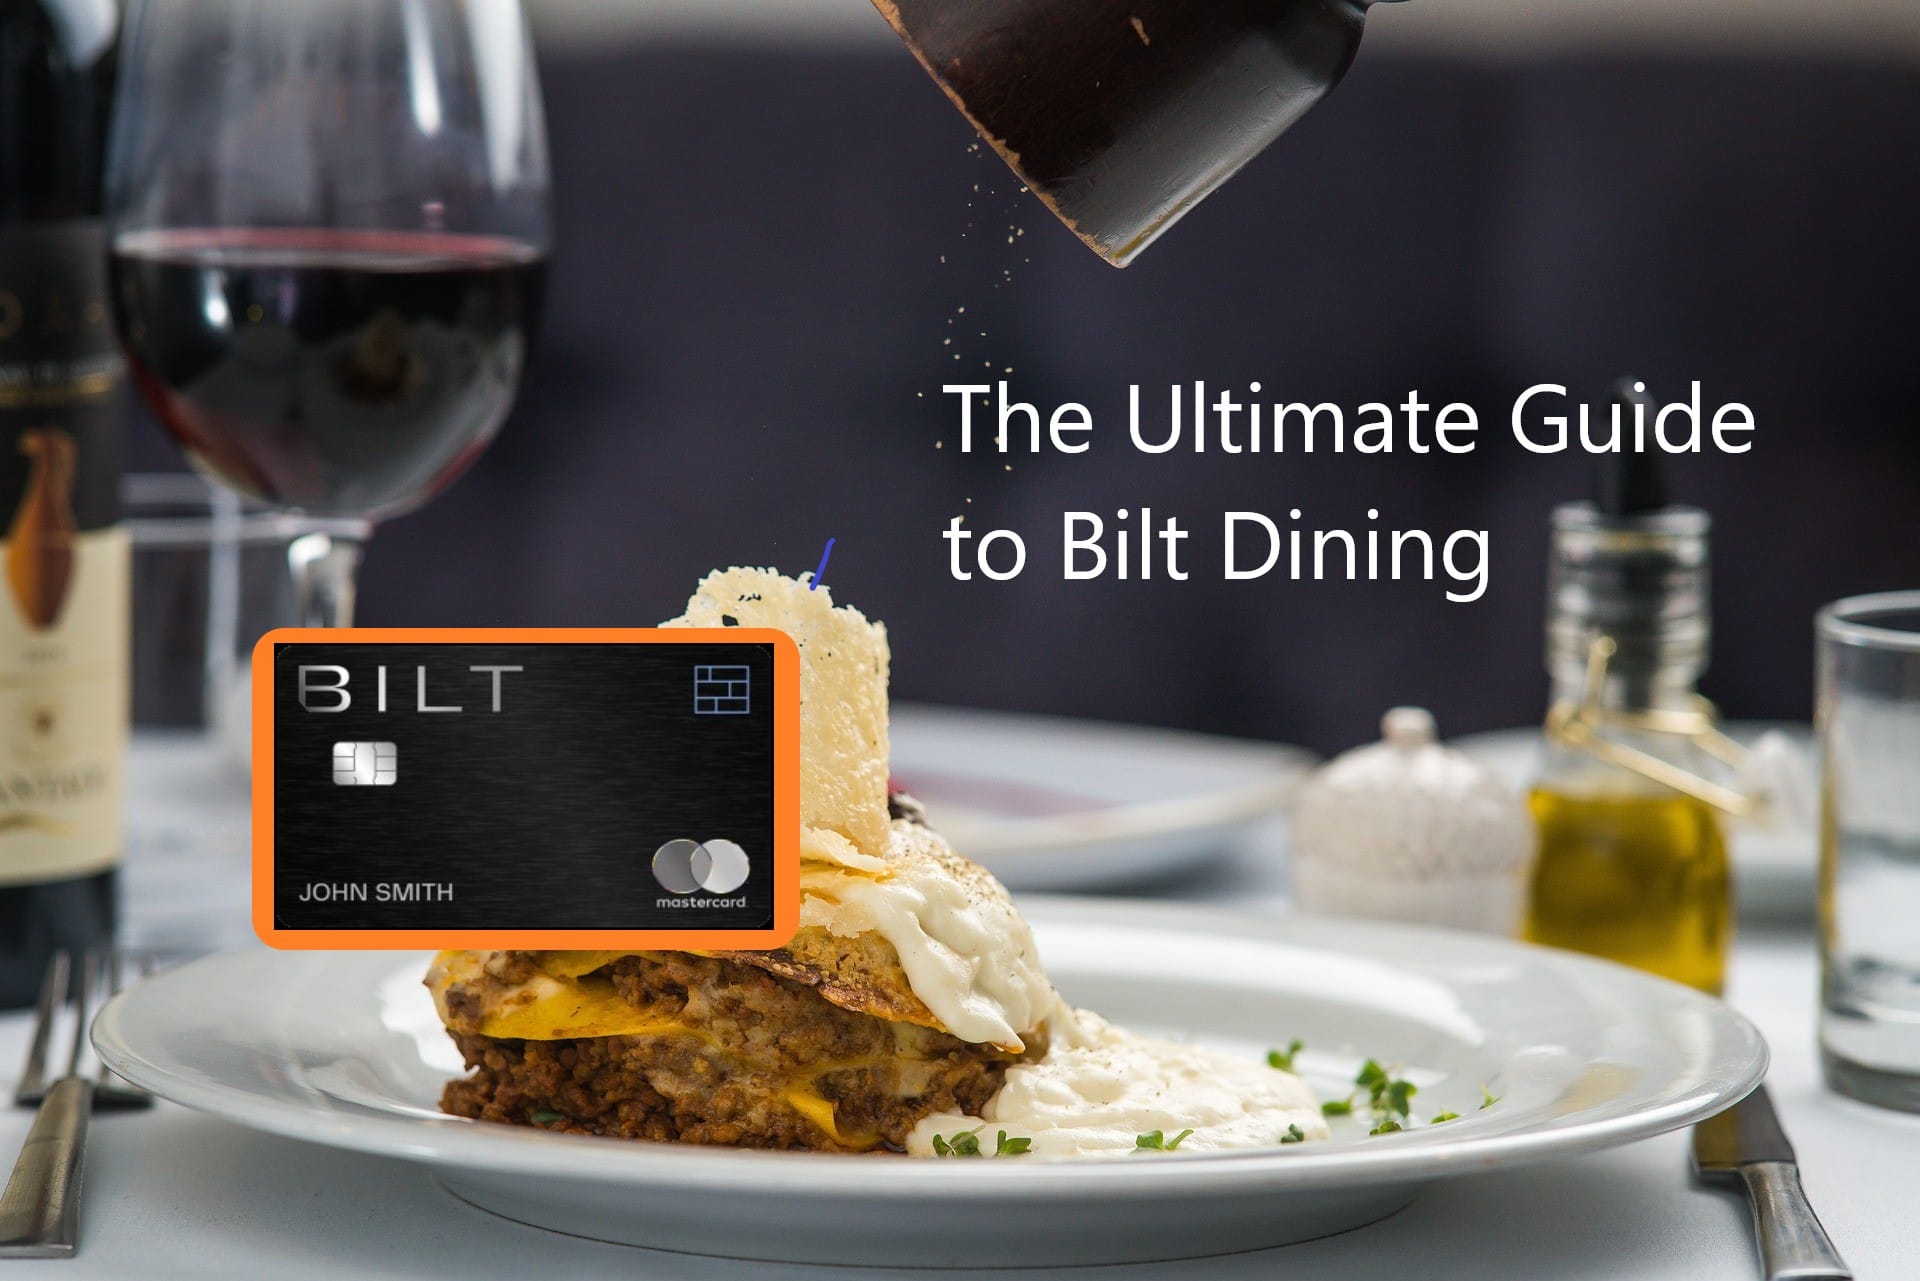 Everything you ever wanted to know about Bilt Dining from Bilt Rewards